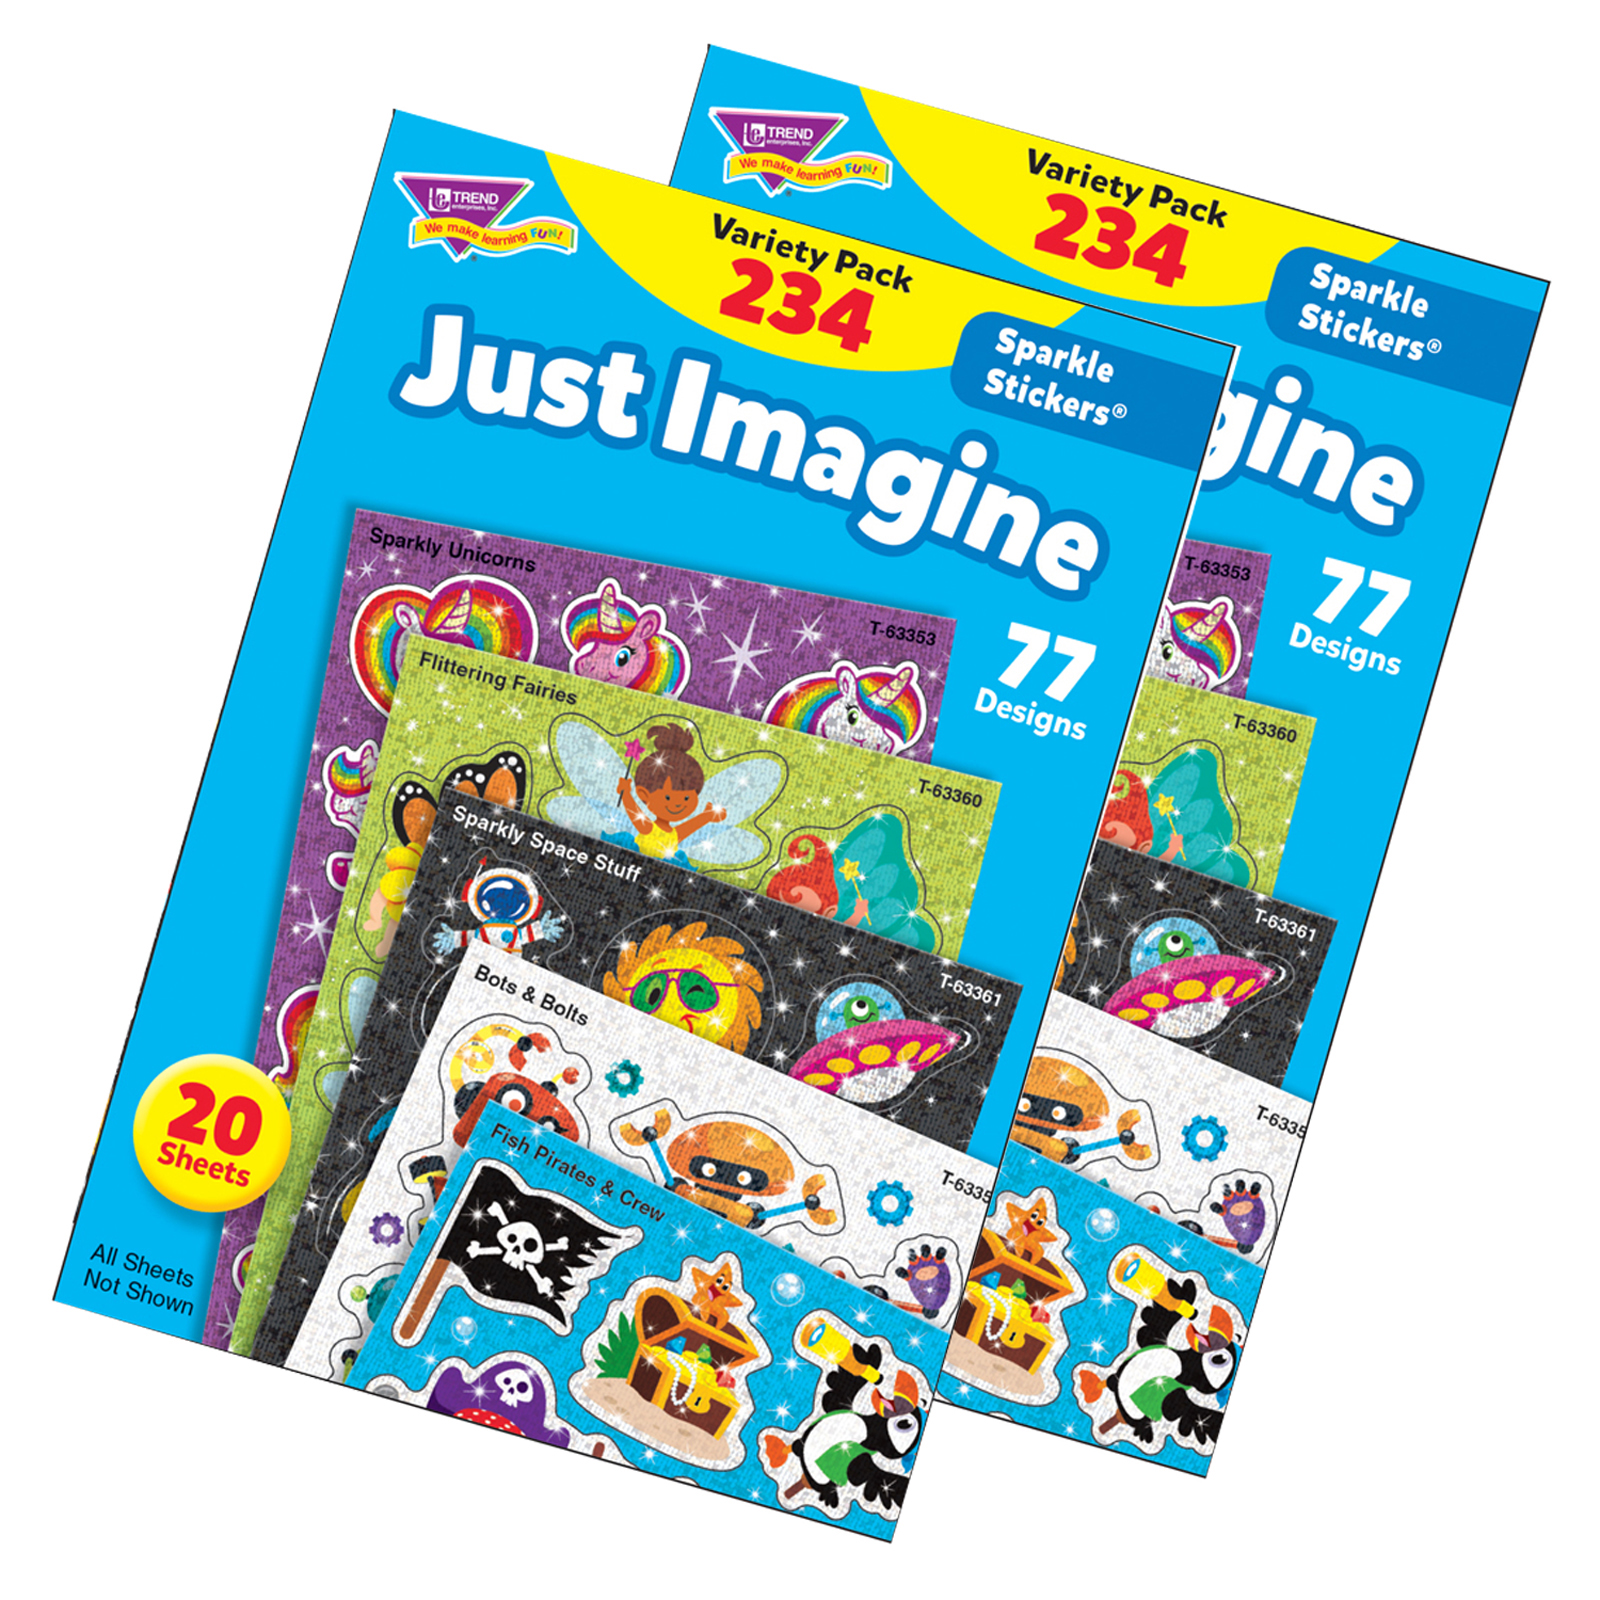 Trend Enterprises® Sparkle Stickers® Just Imagine Variety Pack, 2 Packs of  234